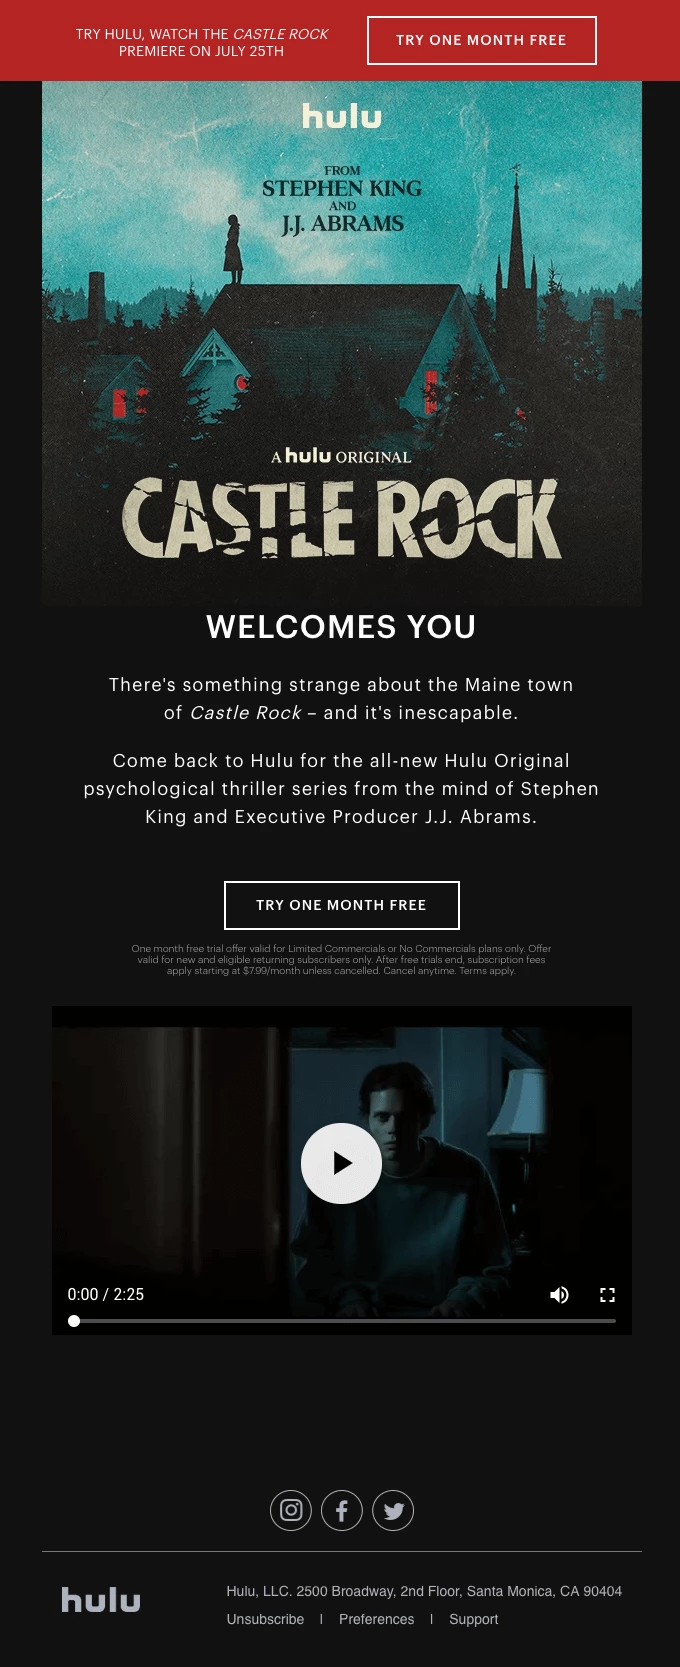 design email example hulu